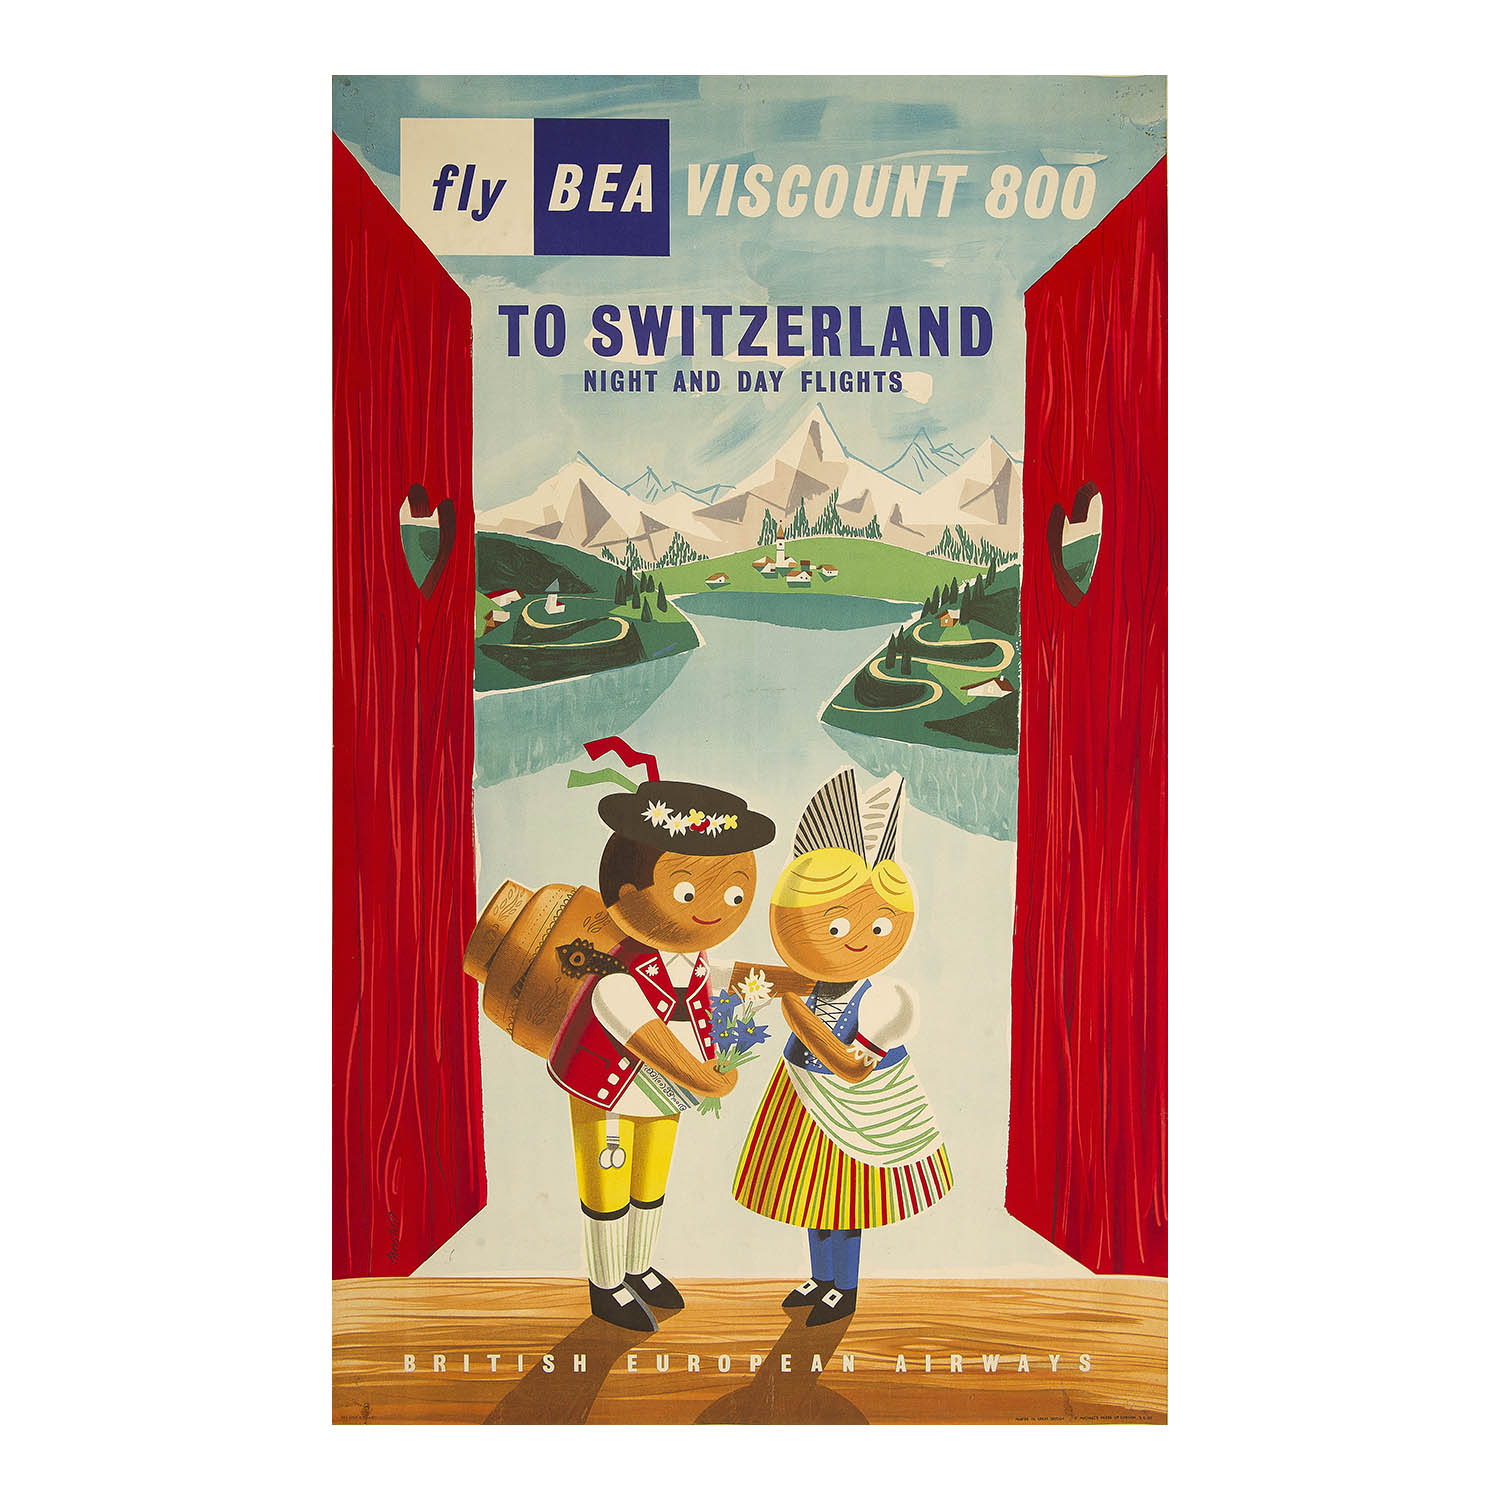 An original British European Airways poster, Fly BEA Viscount 800 to Switzerland, Night and Day Flights, designed by Andre Amstutz, published in 1957. The design features a carved wood ‘Swiss’ couple in the foreground, with the snow-capped Alps in the background. 